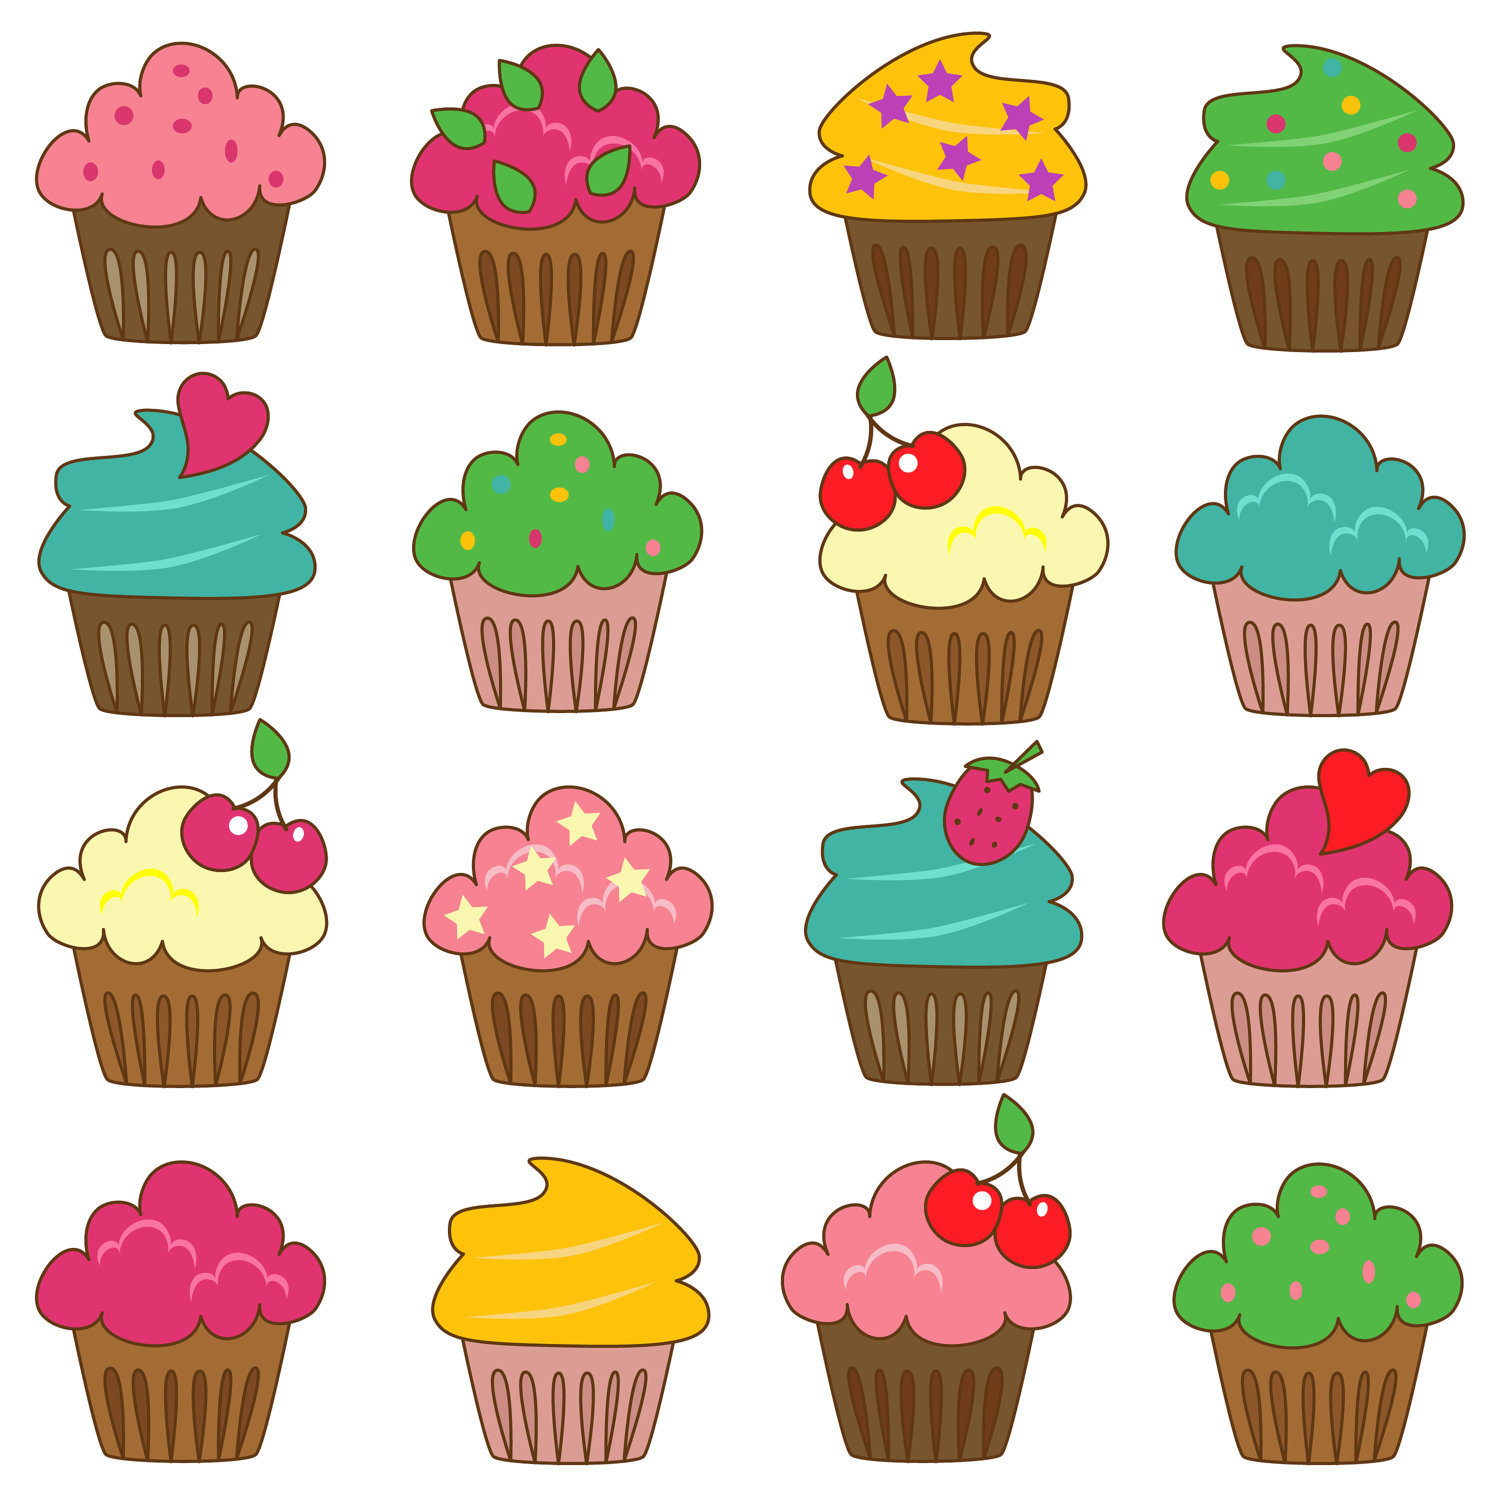 Cupcakes Clip Art Clipart Commercial And Personal By Pinkpueblo